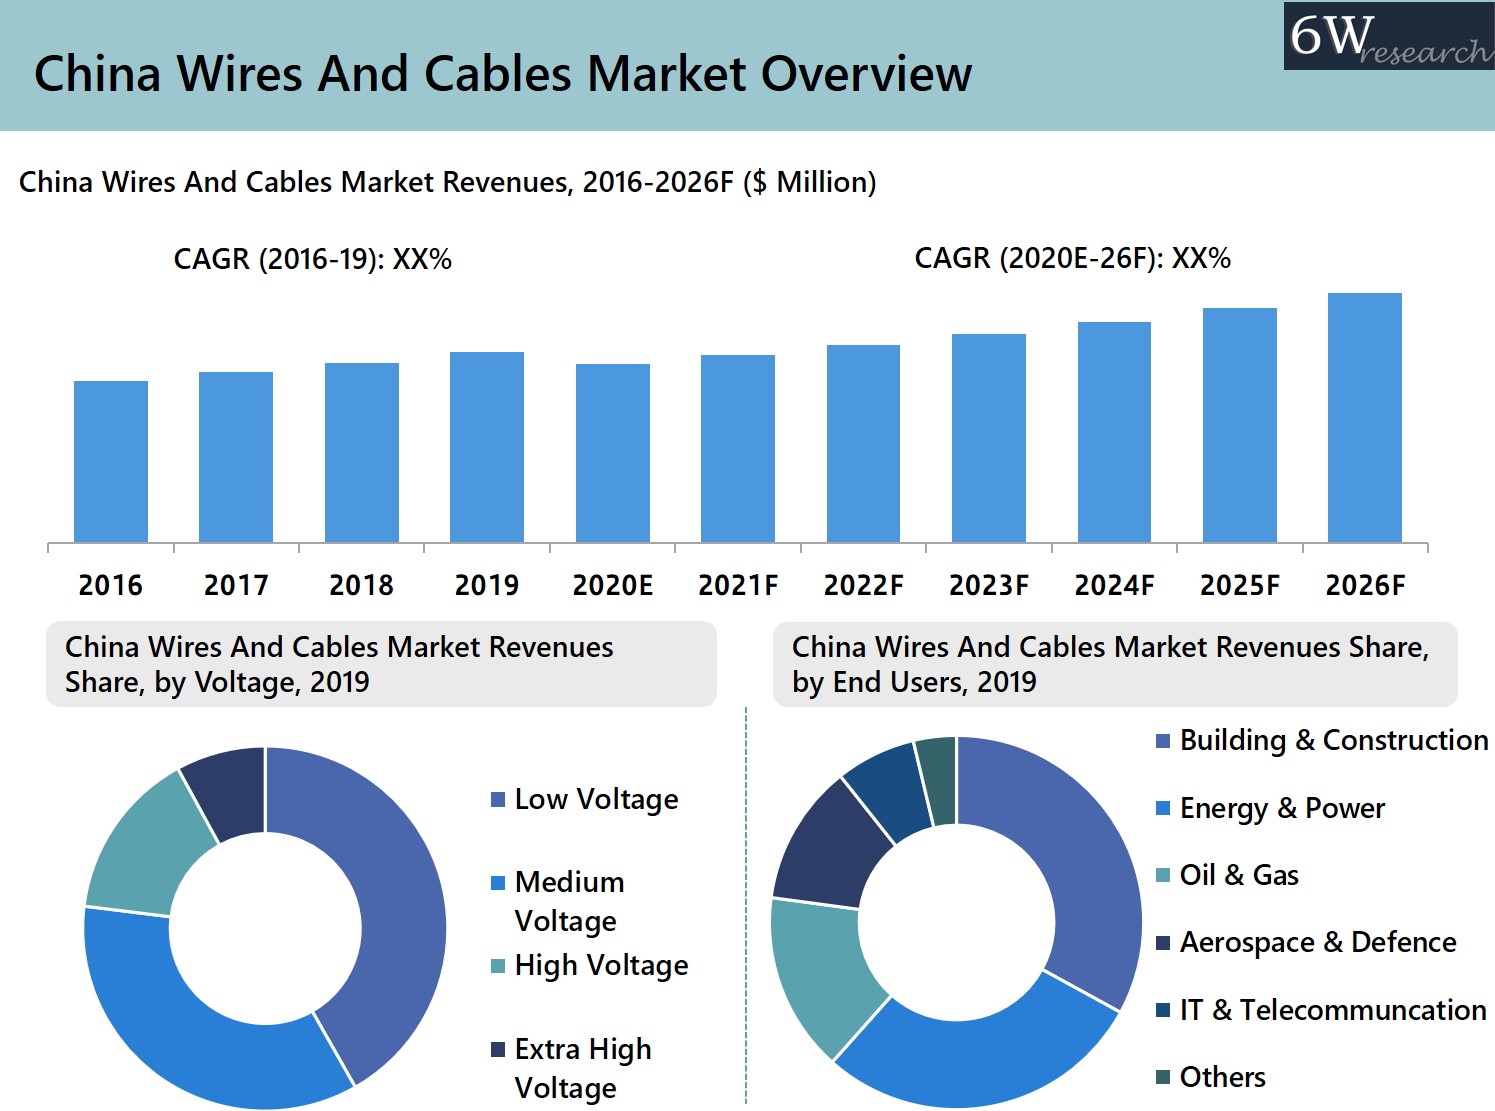 China Wires And Cables Market